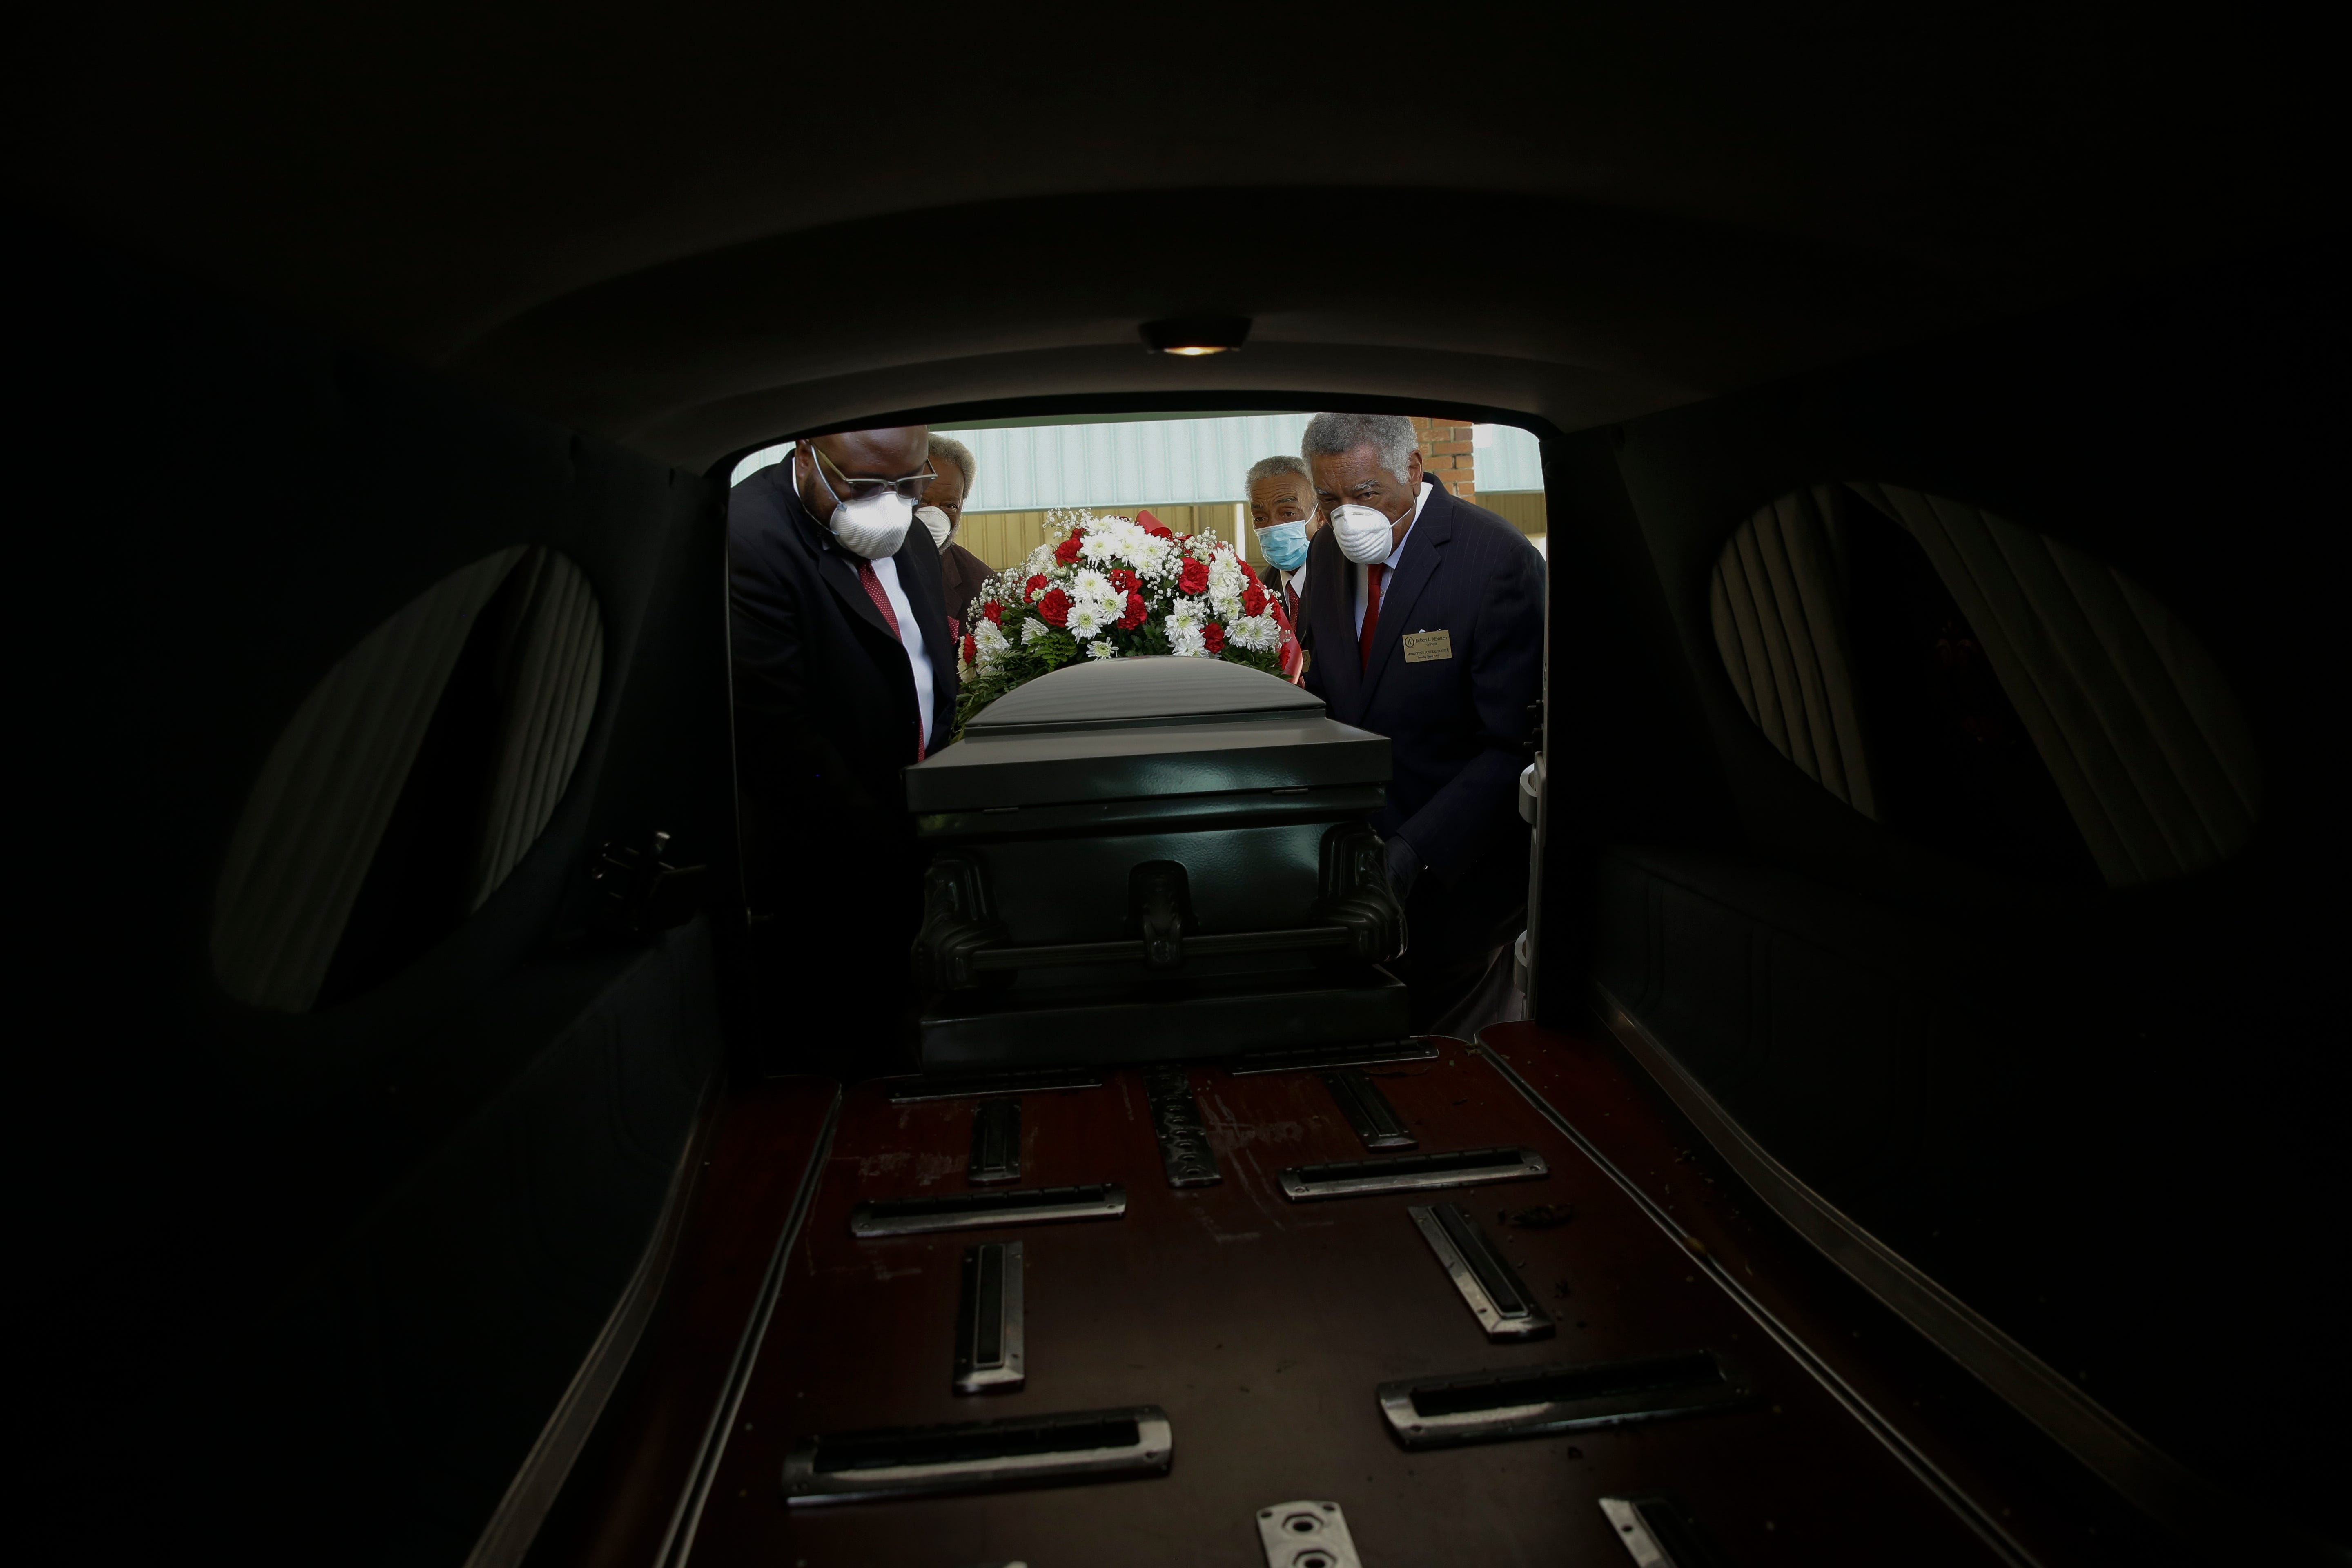 Mortician Cordarial O. Holloway, foreground left, funeral director Robert L. Albritten, foreground right, and funeral attendants Eddie Keith, background left, and Ronald Costello place a casket into a hearse on Saturday, April 18, 2020, in Dawson, Ga. Across the county, the latest Associated Press analysis of available state and local data shows that nearly one-third of those who have died are African American, with black people representing about 14% of the population in the areas covered.